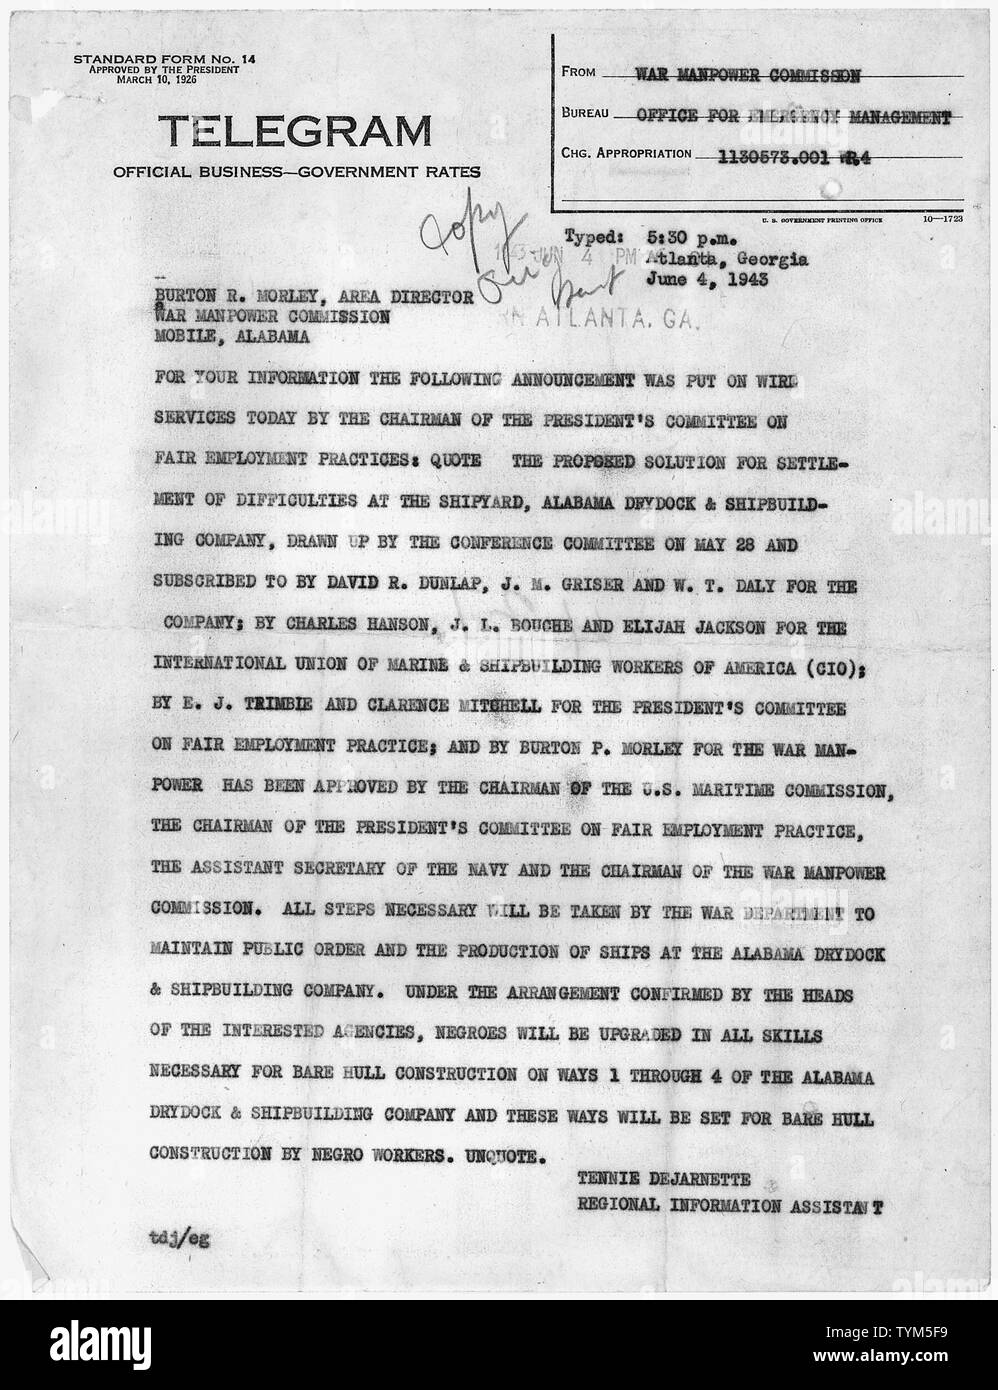 Telegram from Tennie Dejarnette, Regional Information Assistant, to Burton R. Morley, Area Director, relaying the announcement from the Chairman of the President's Committee on Fair Employment practices regarding pay discrepencies at the Alabama Dry Dock and Shipyard Corporation. Stock Photo